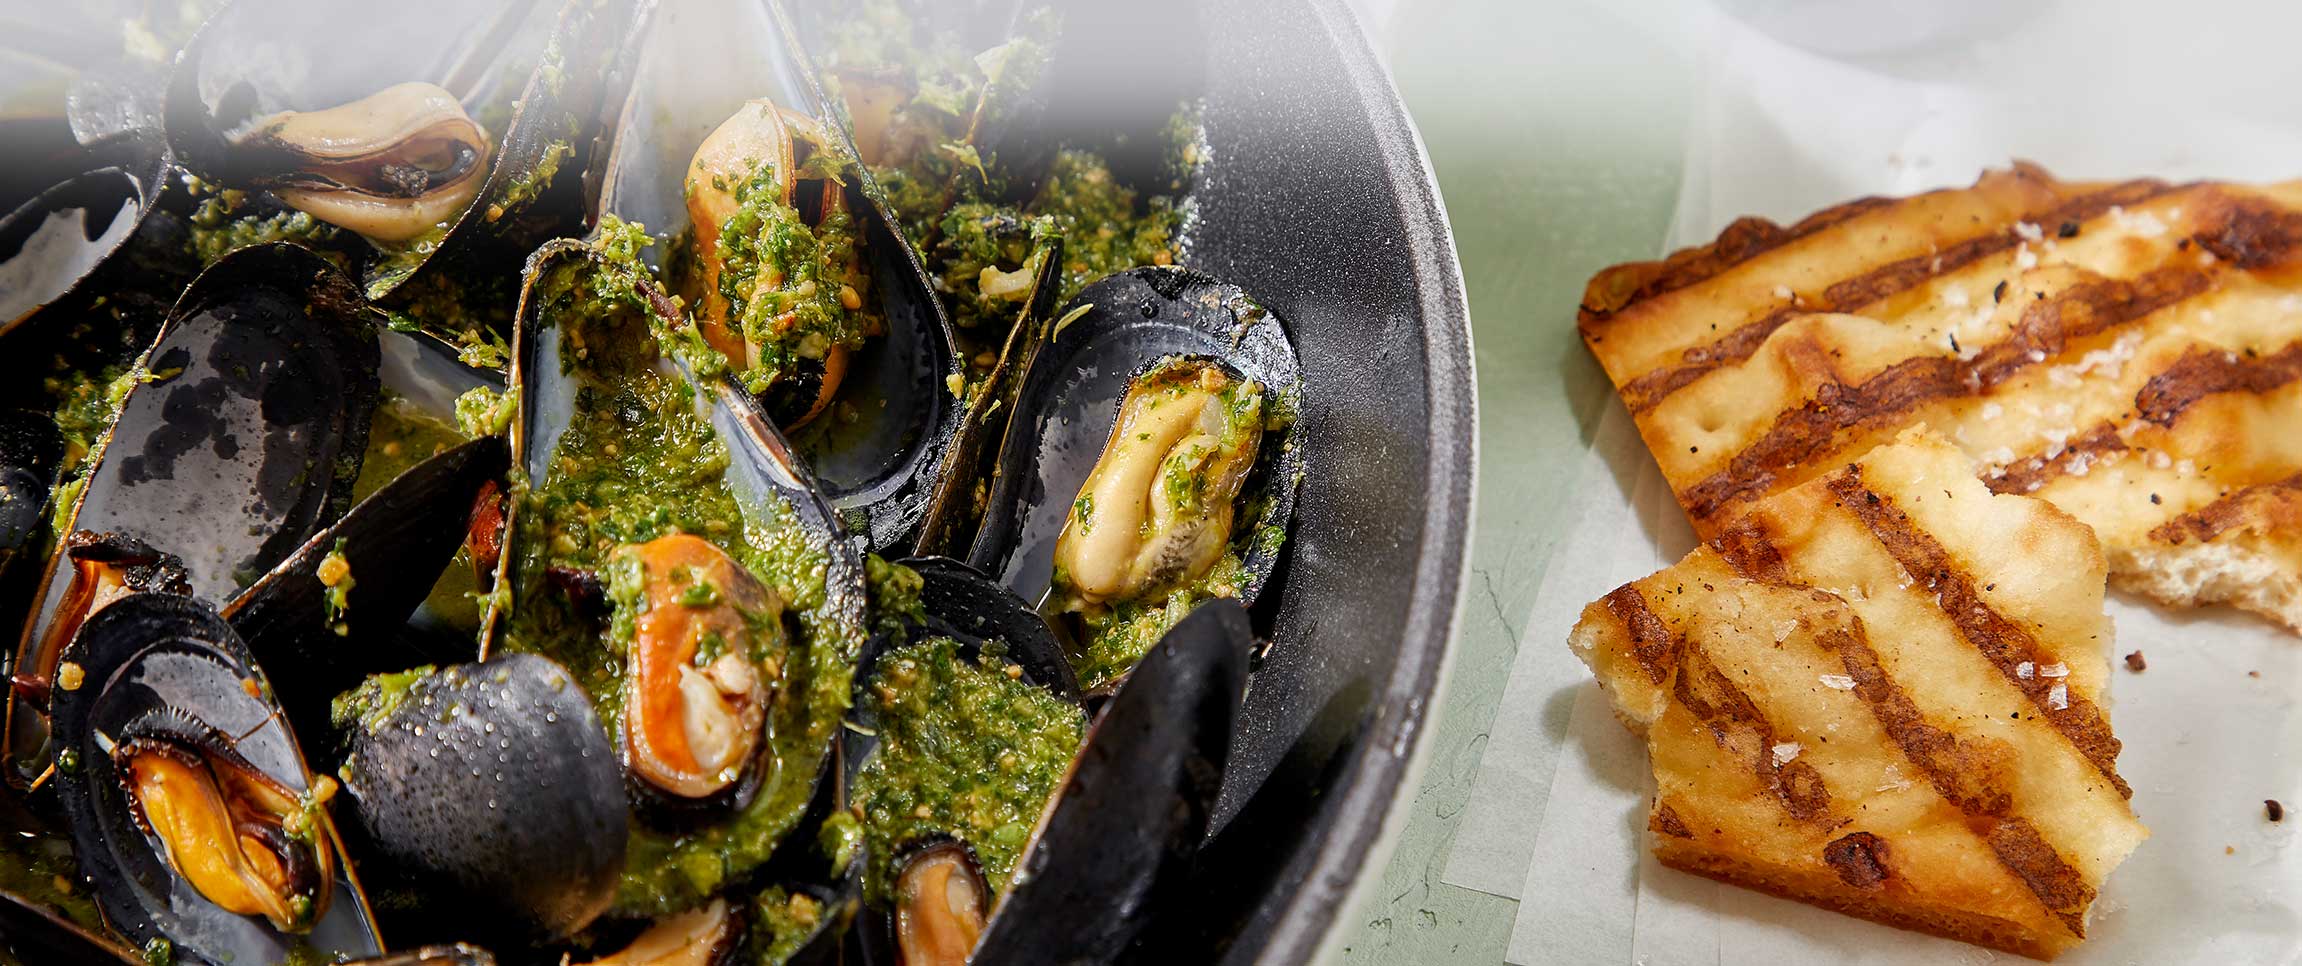 Mussels in Cilantro Pesto with Fry Bread